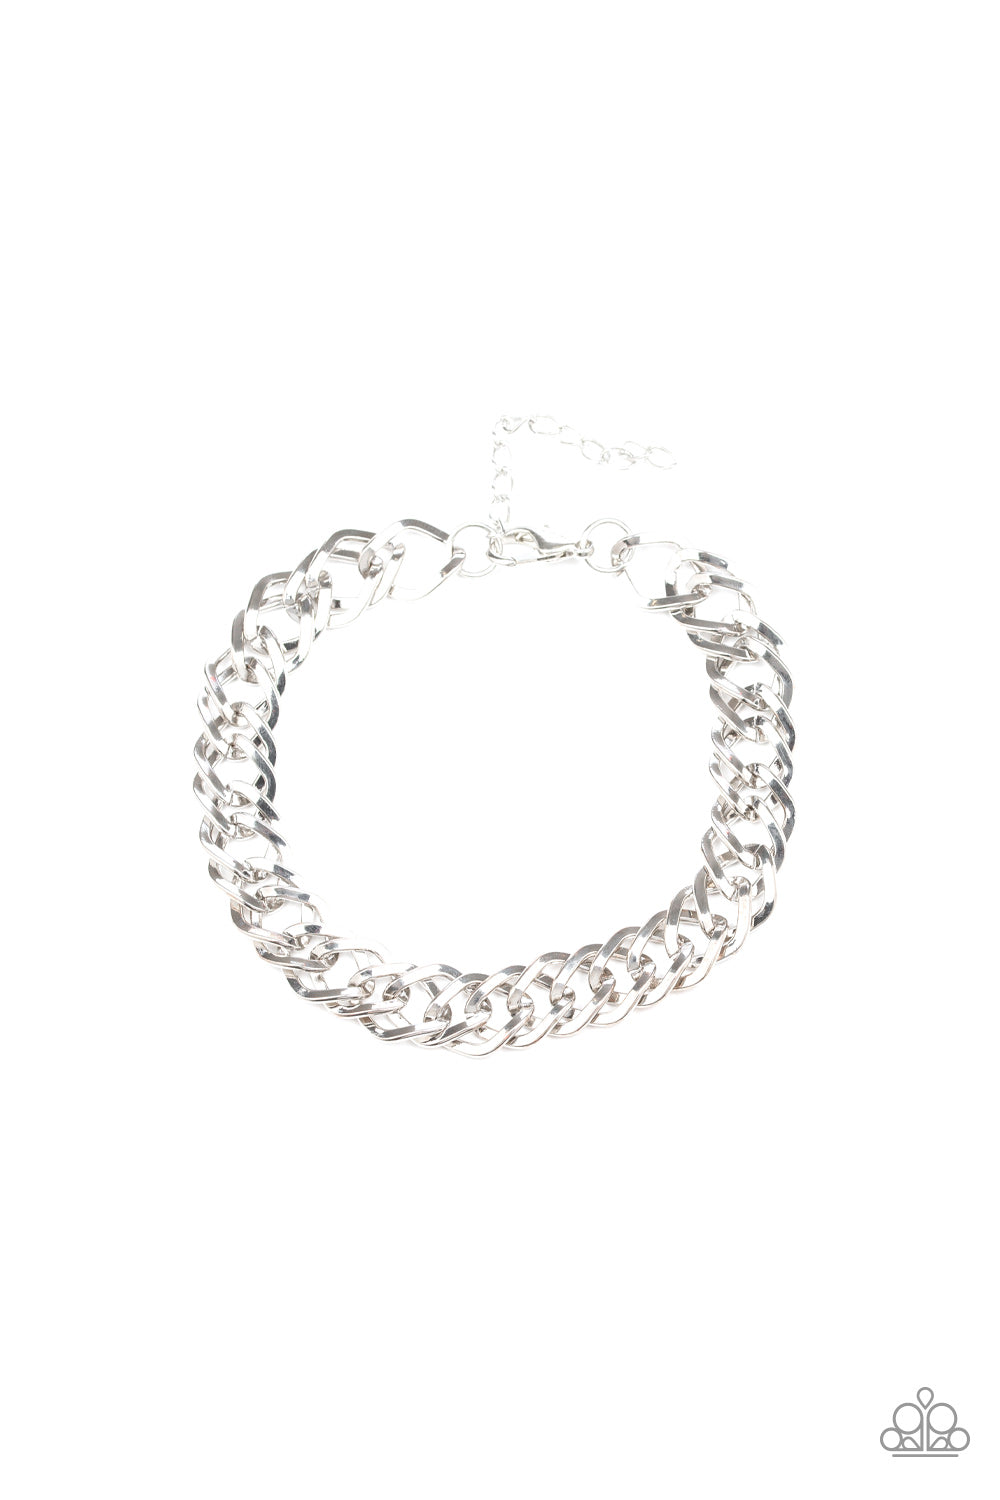 Paparazzi Accessories - On The Ropes - Silver Bracelet